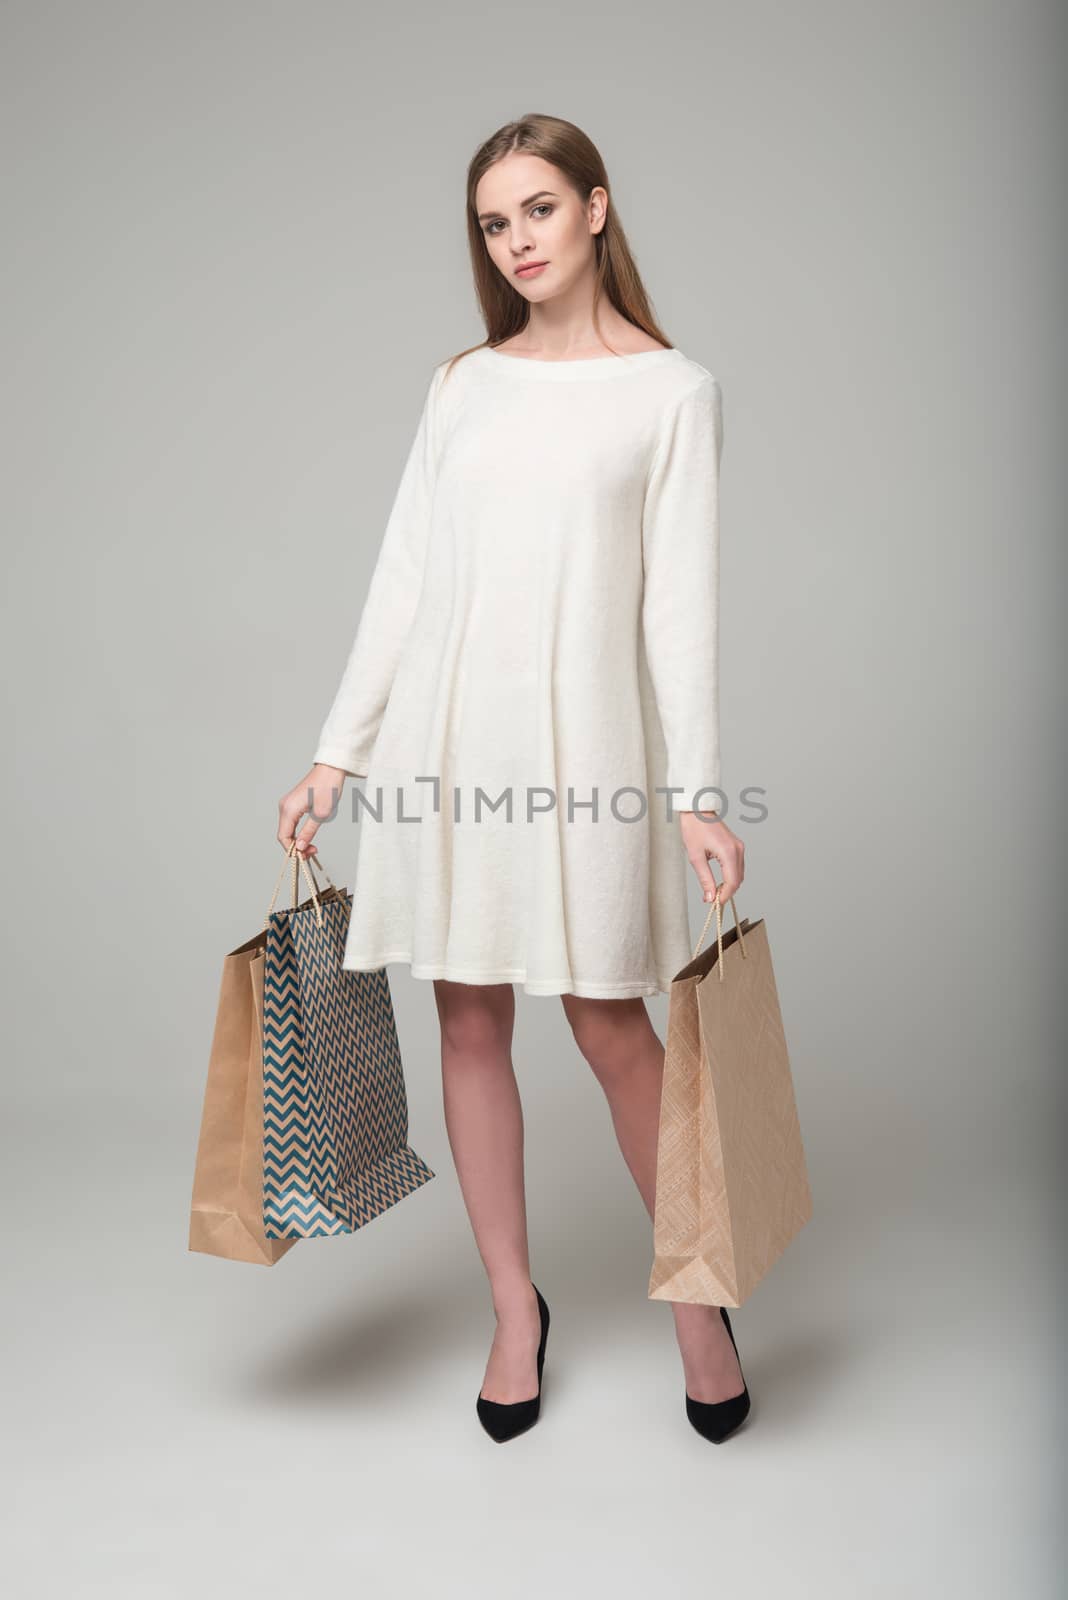 Young model long-haired blond girl in white short dress stands holding shopping packages